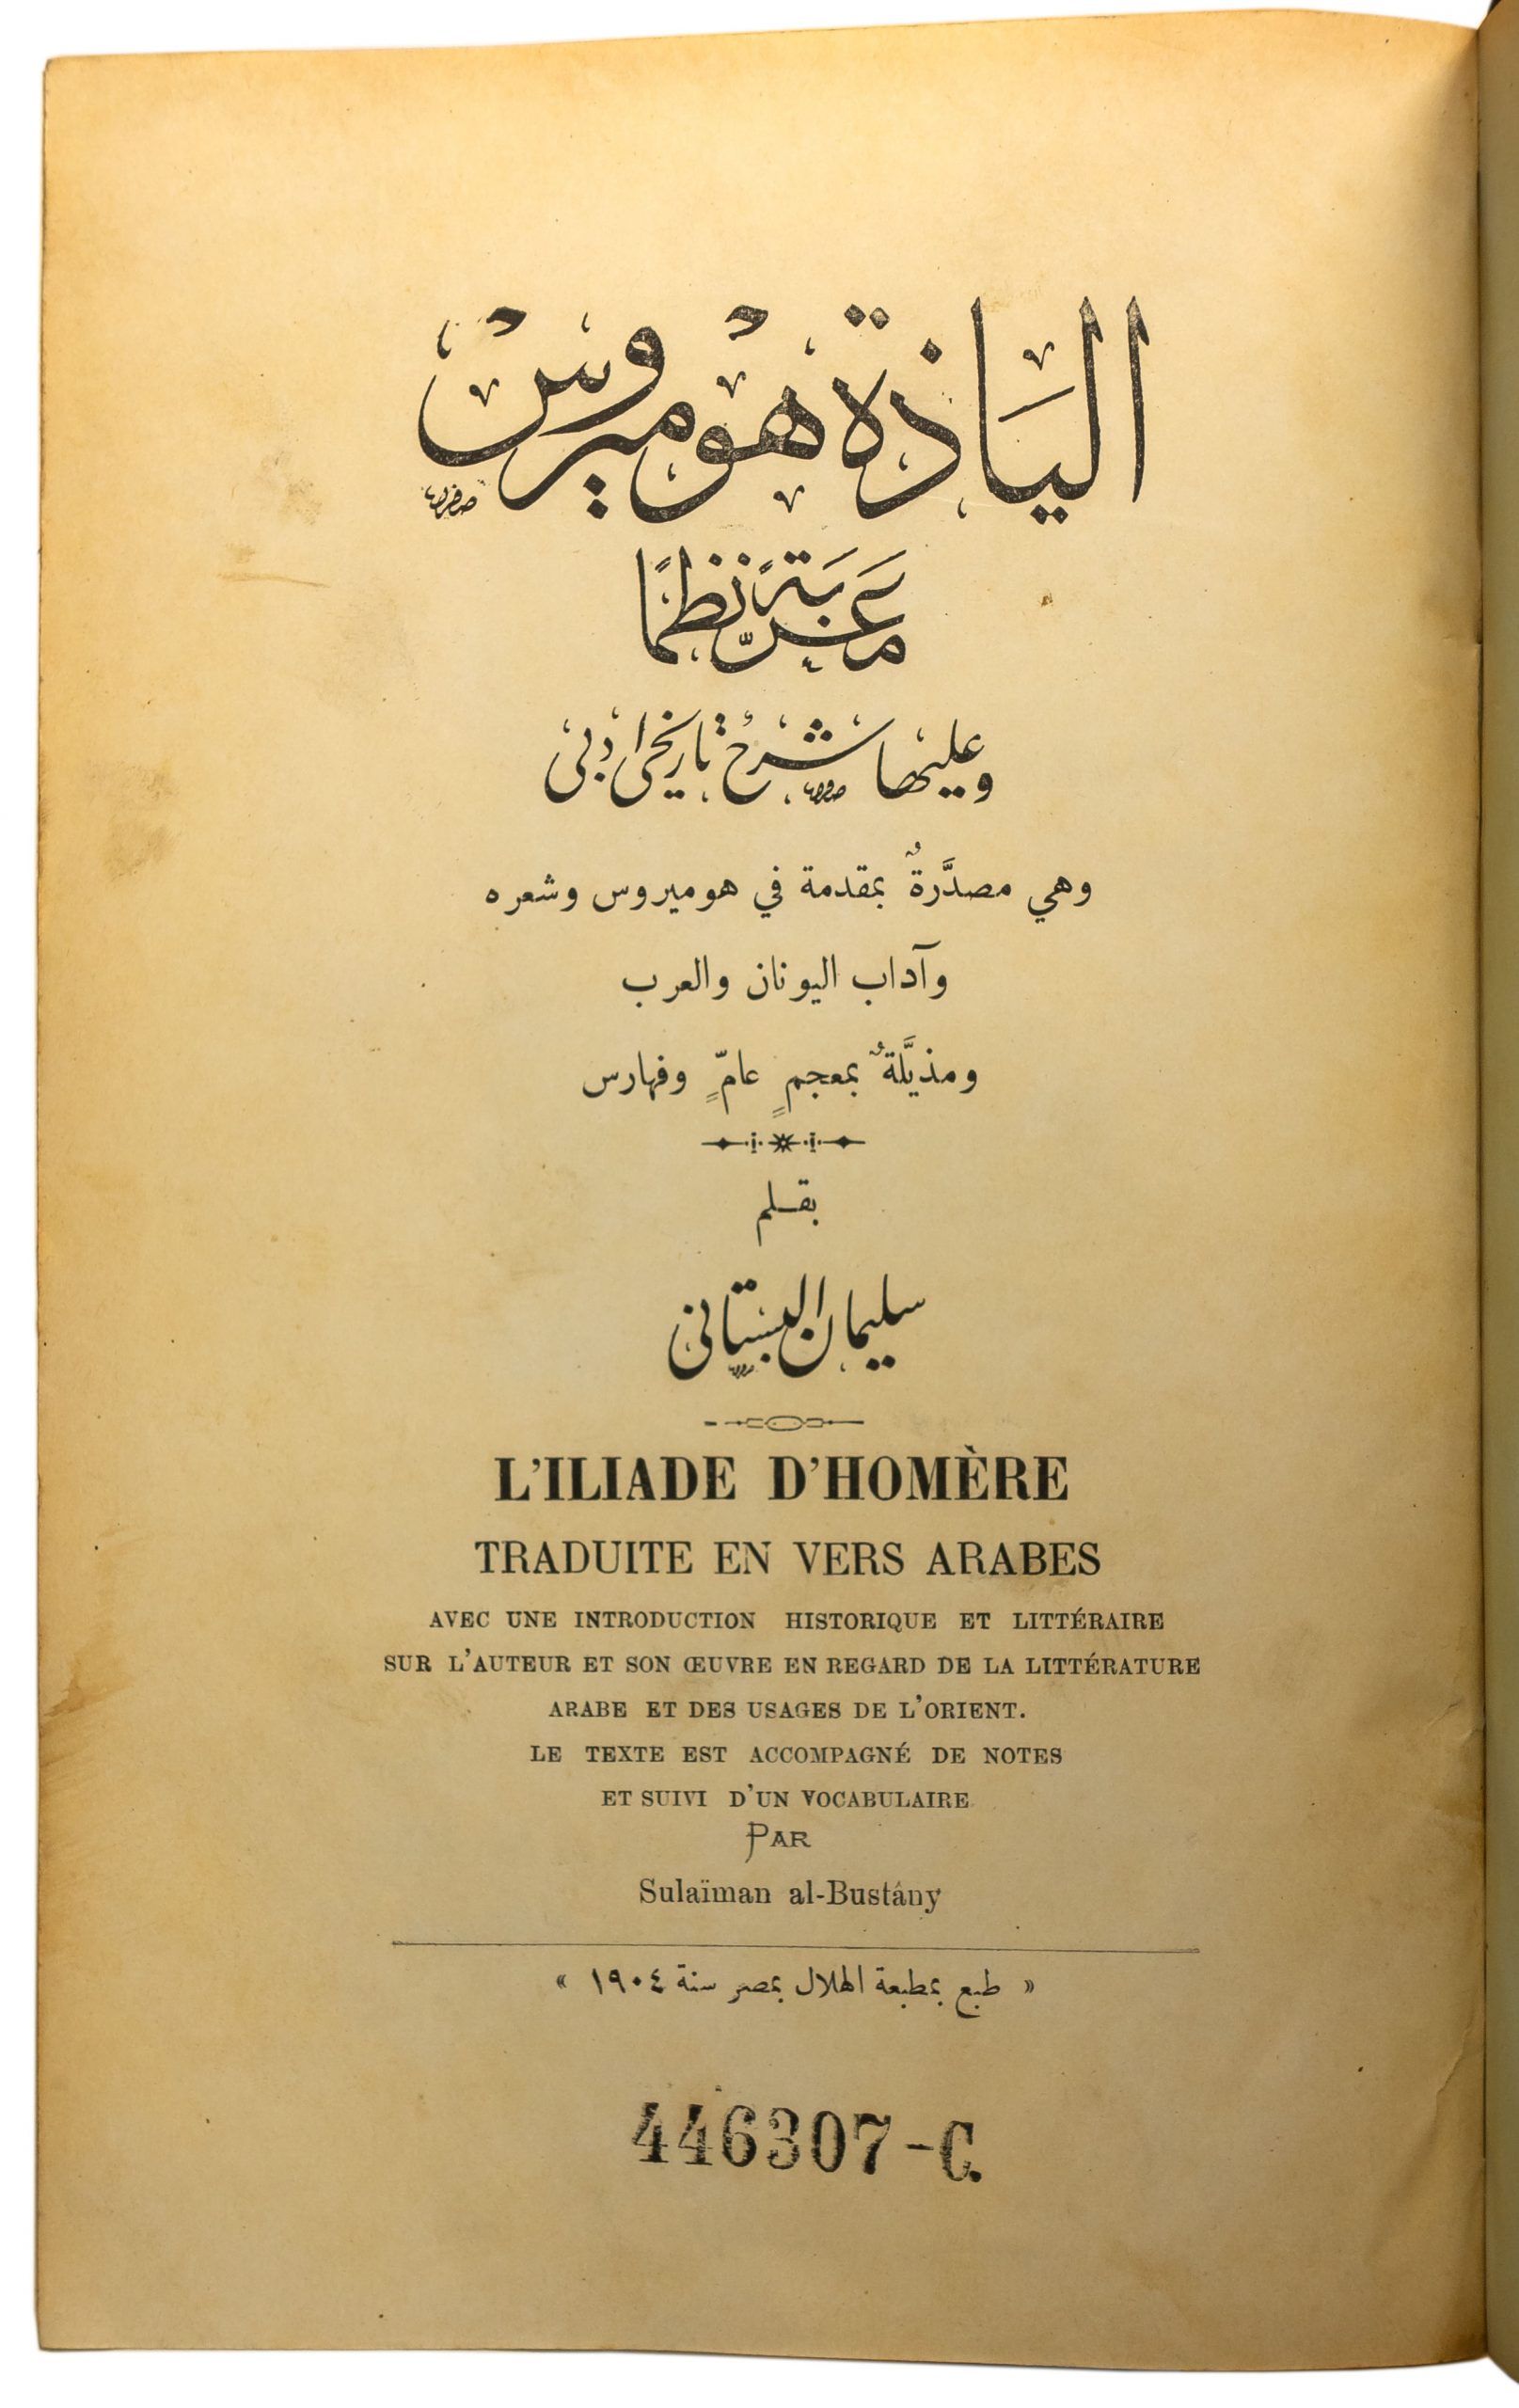 Ilyadah Humirus, title page, courtesy of the Austrian National Library, 446307-C, http://data.onb.ac.at/rec/AC09967190